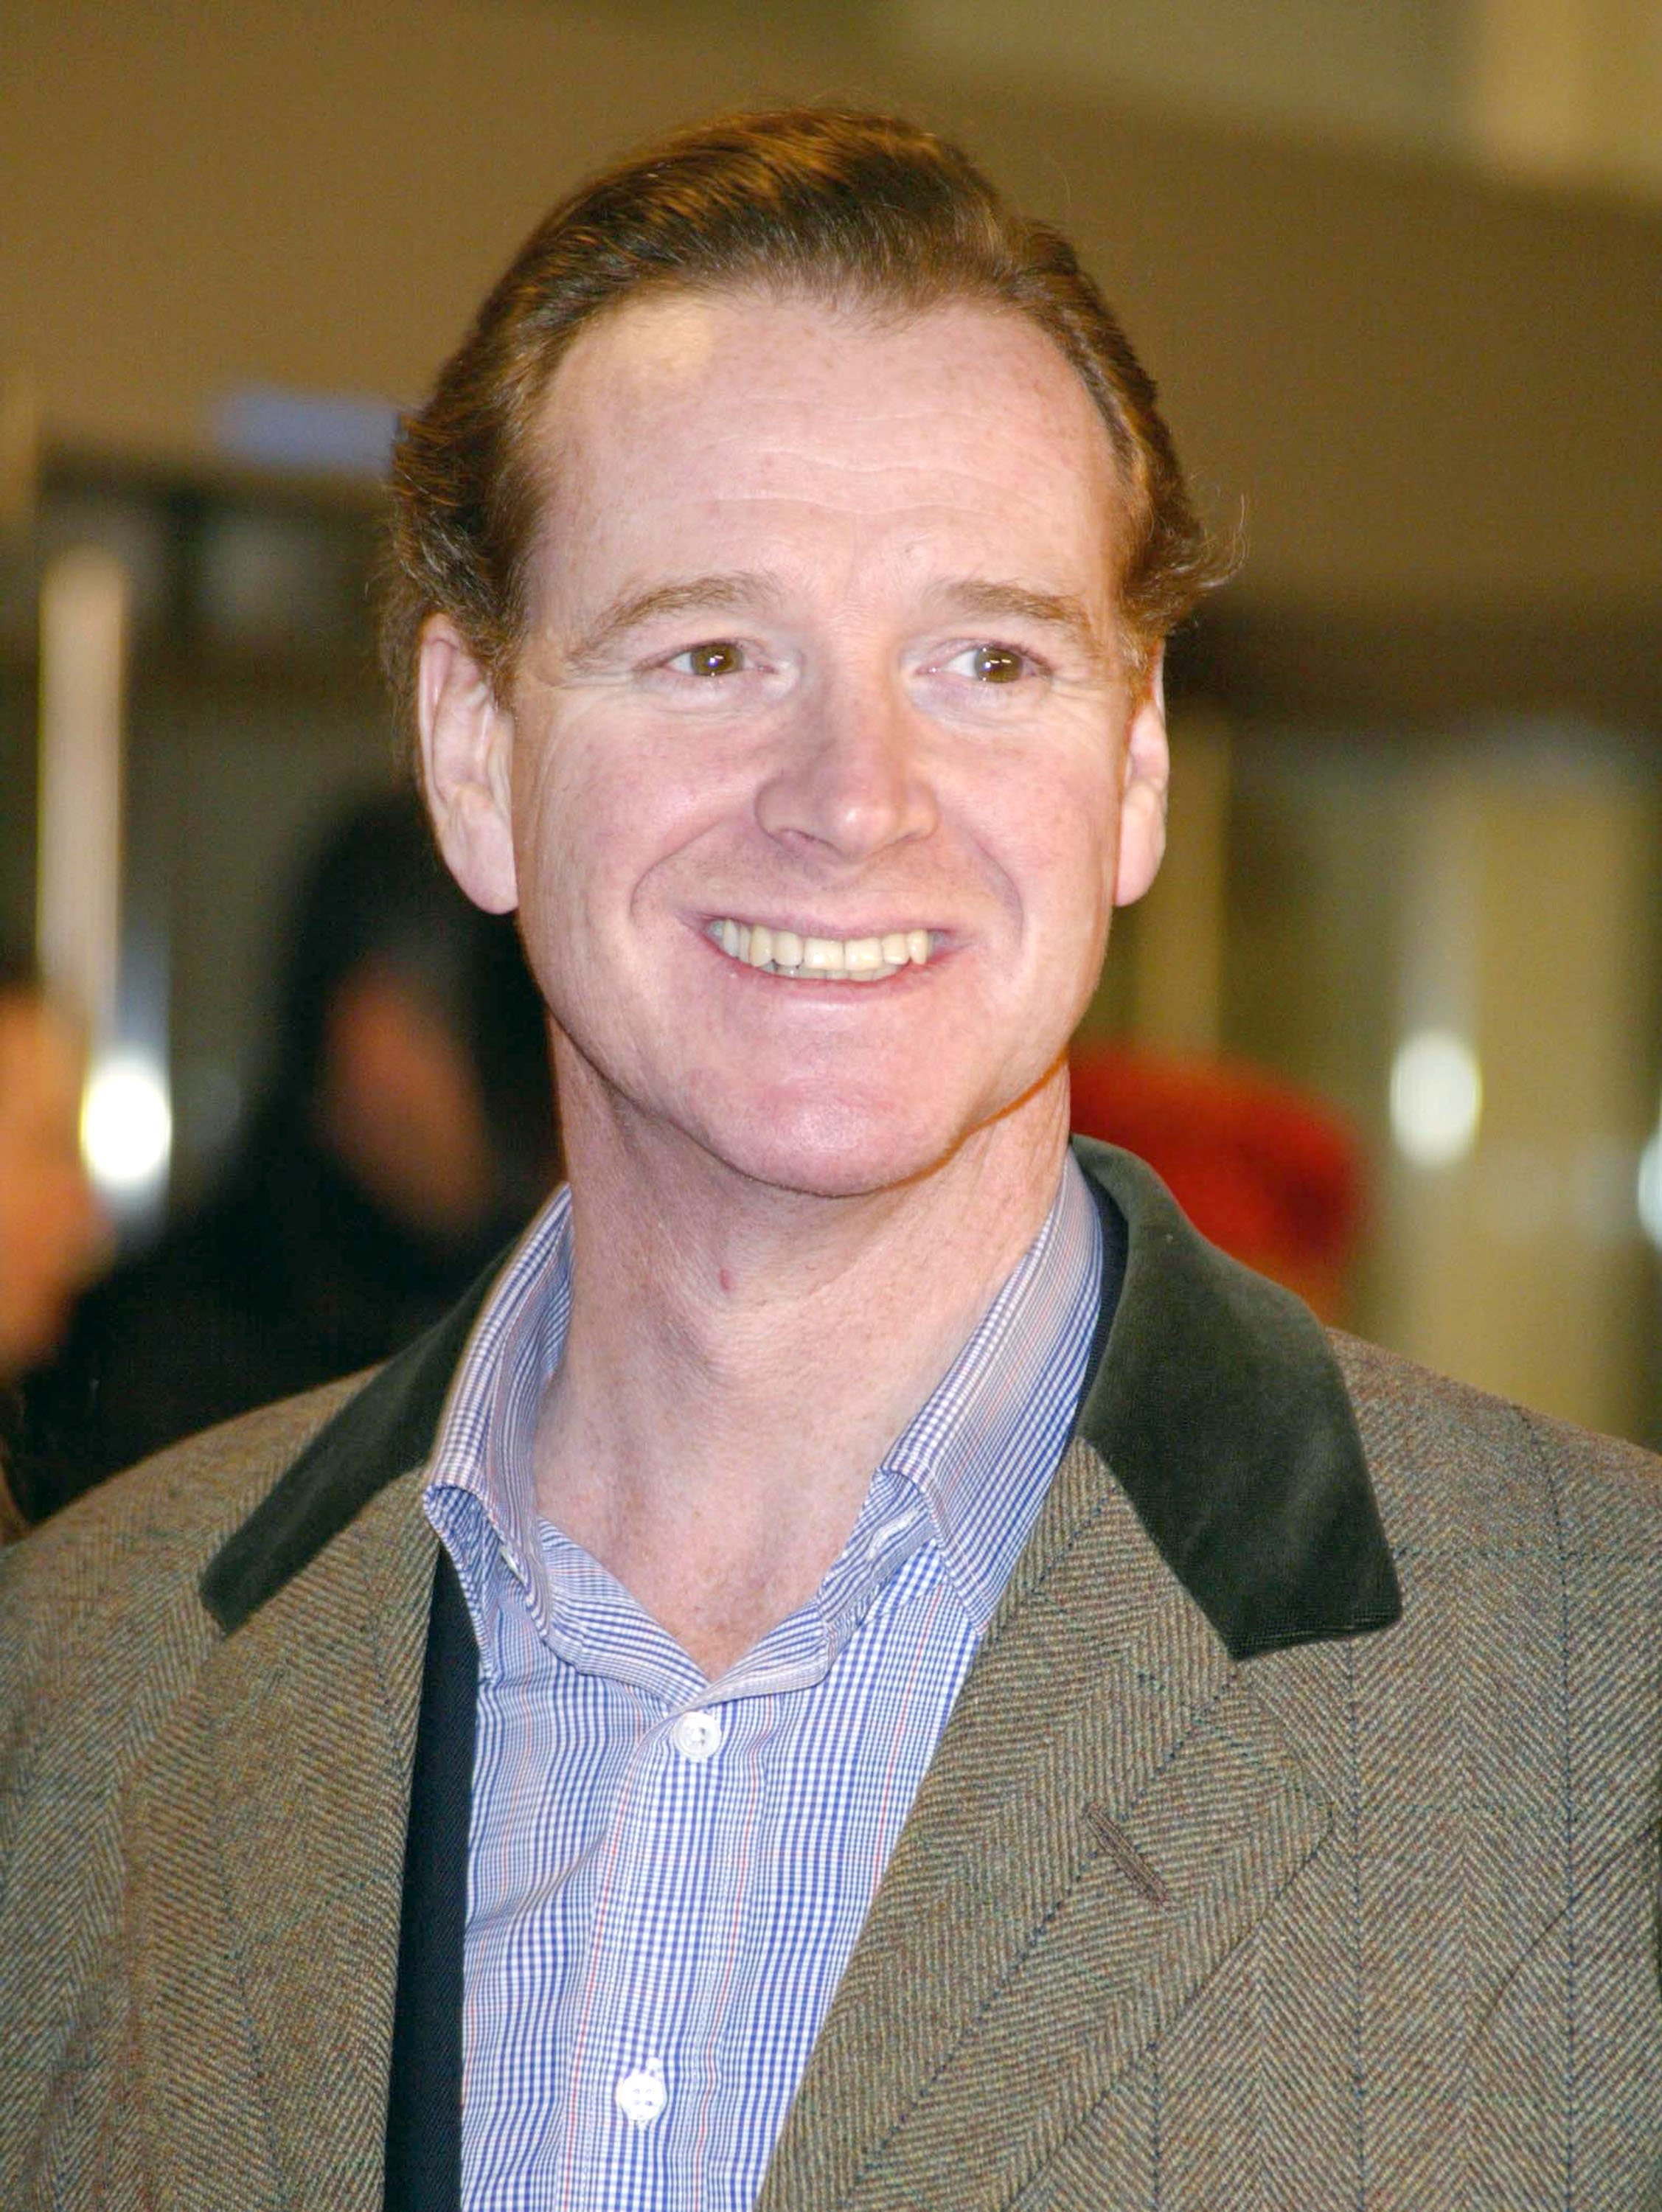 James Hewitt at the "Starsky and Hutch" London premiere on March 11, 2003 | Source: Getty Images